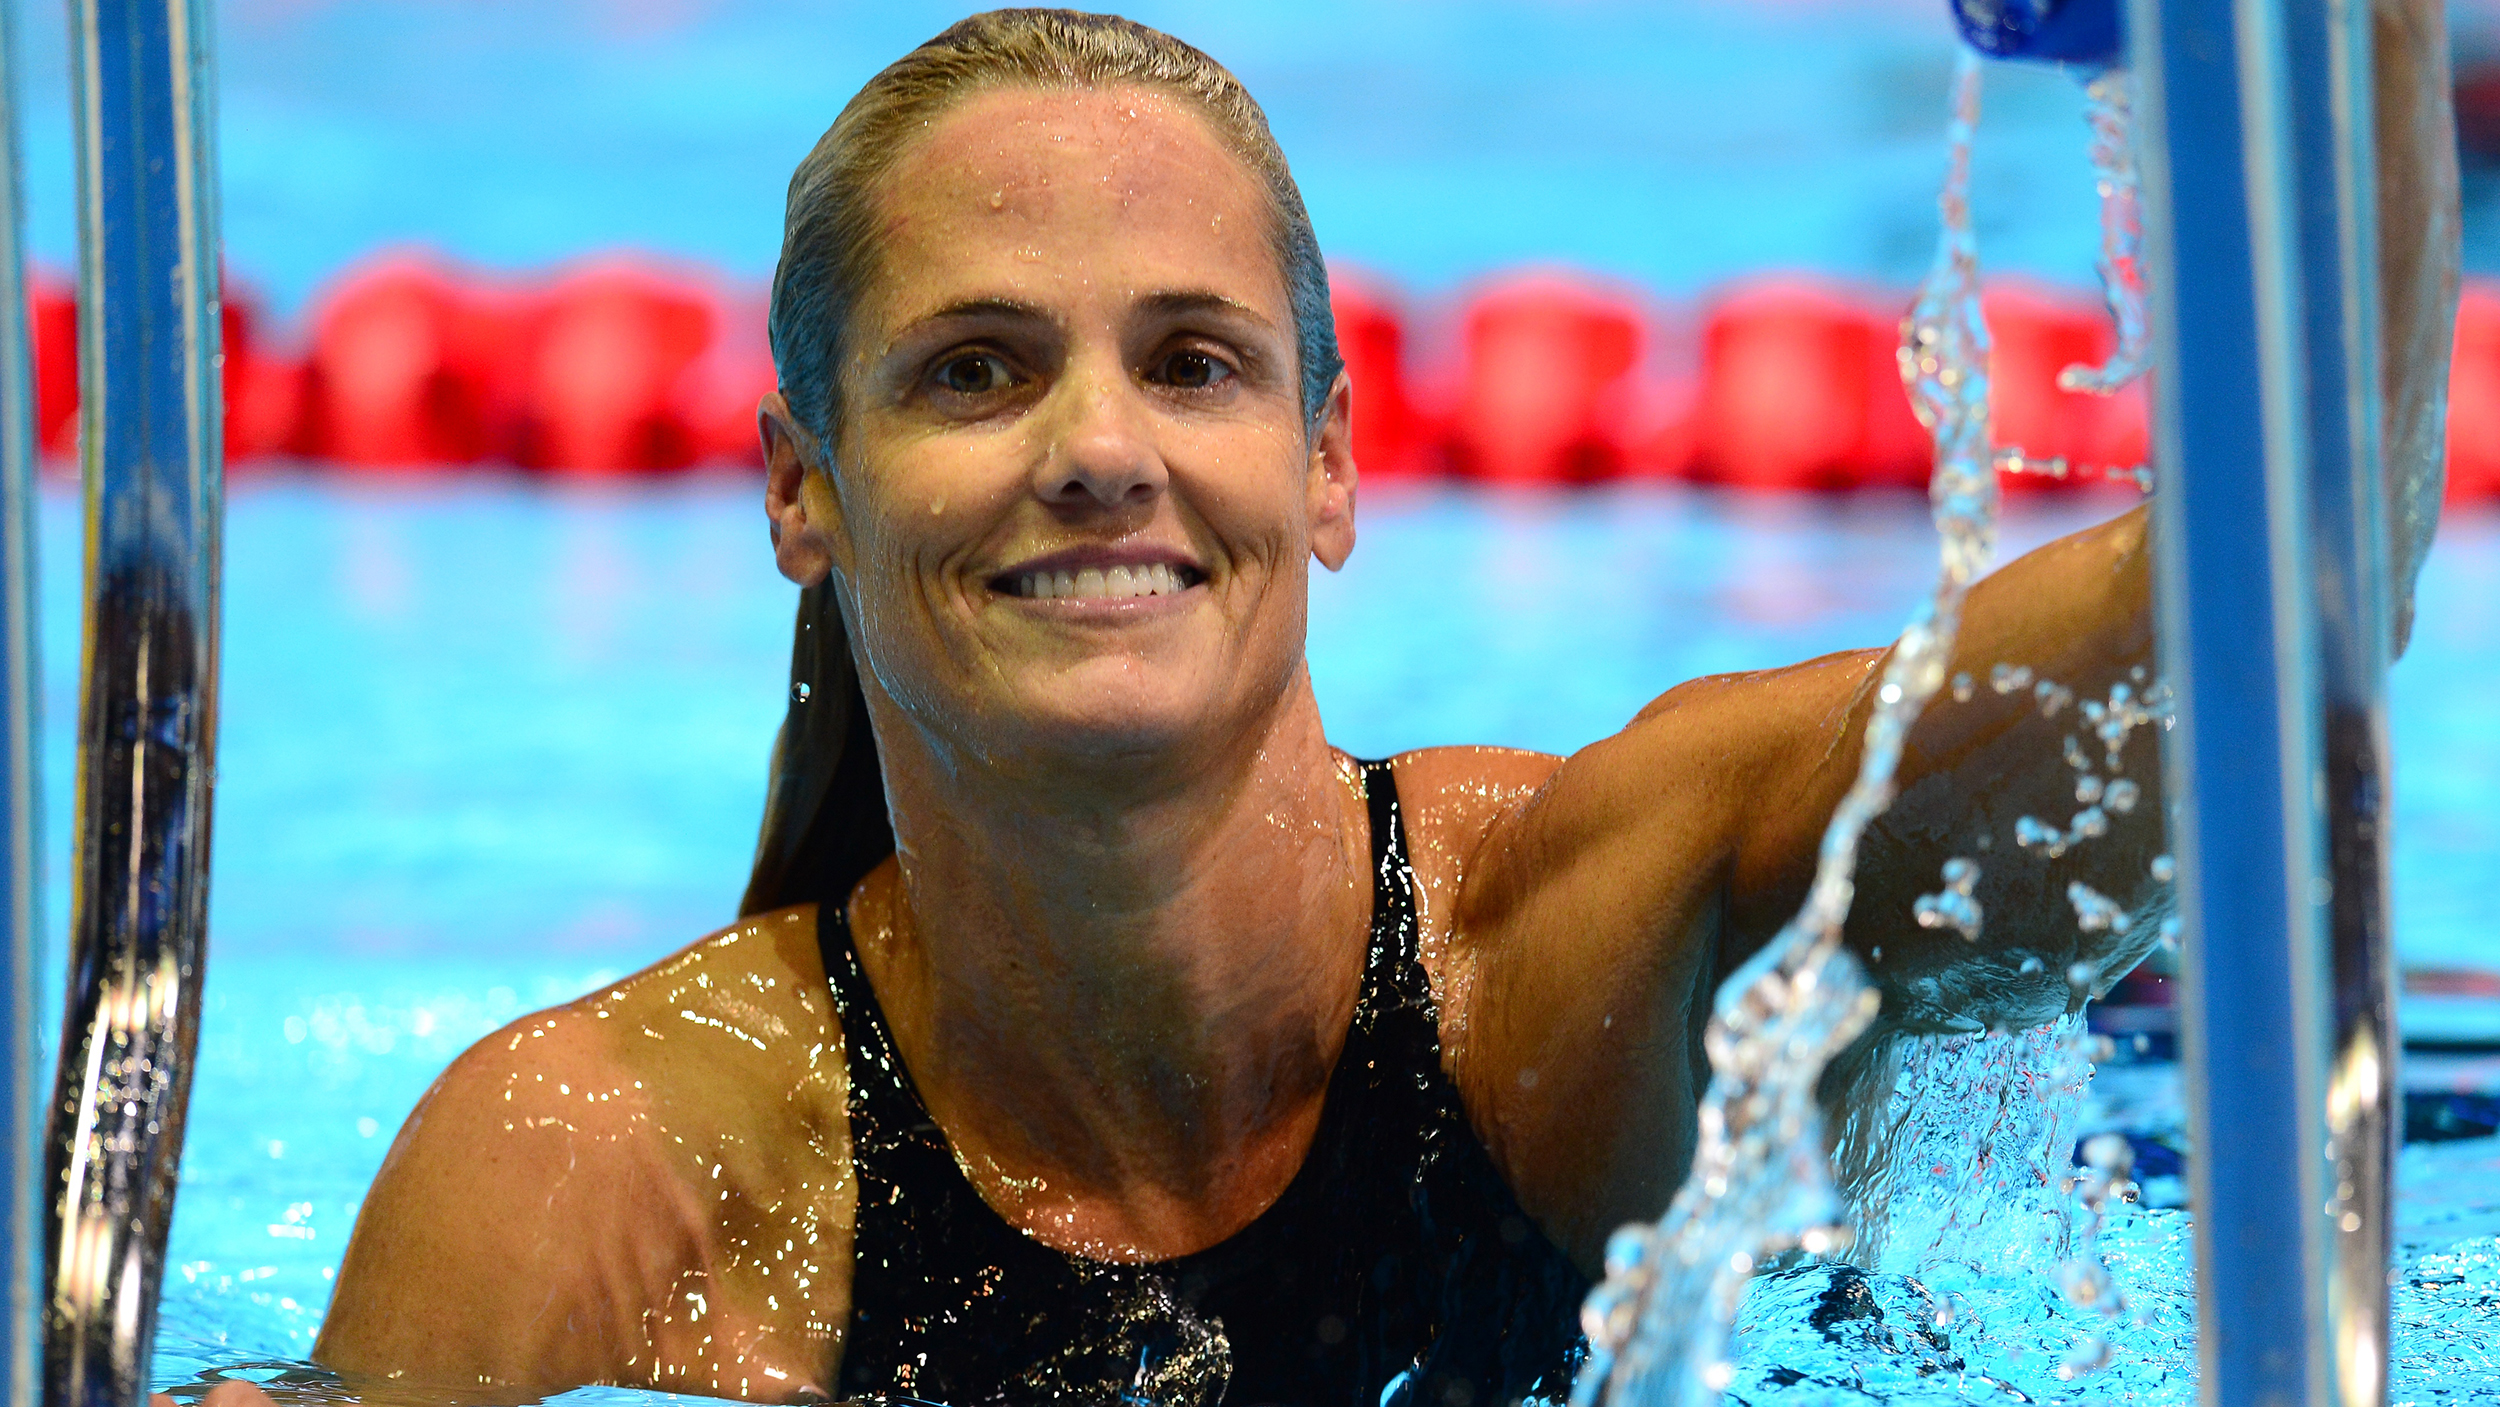 World's Best Female Swimmer? Making a Case for 7 Standouts